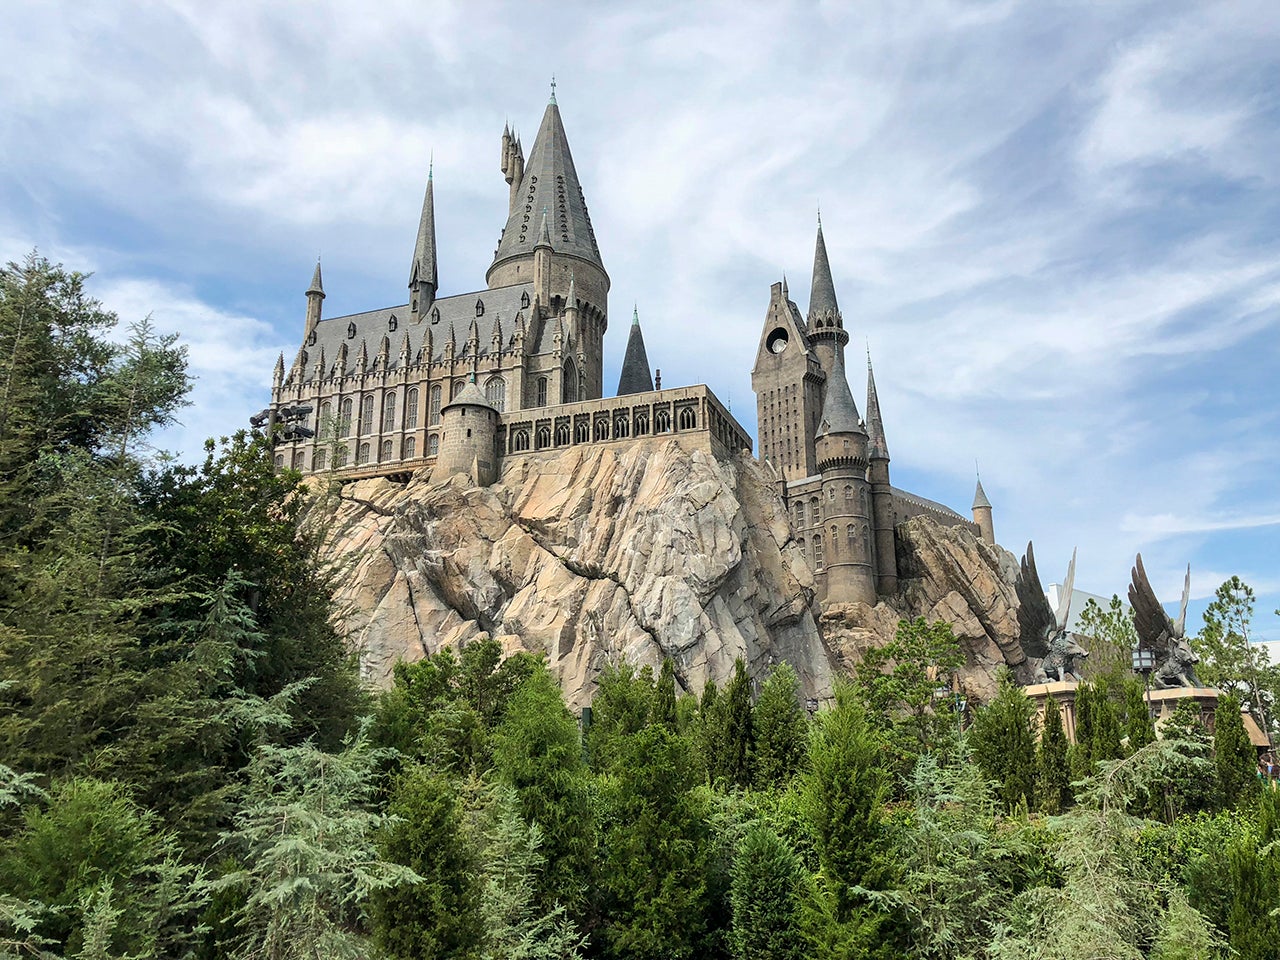 best time to visit harry potter world